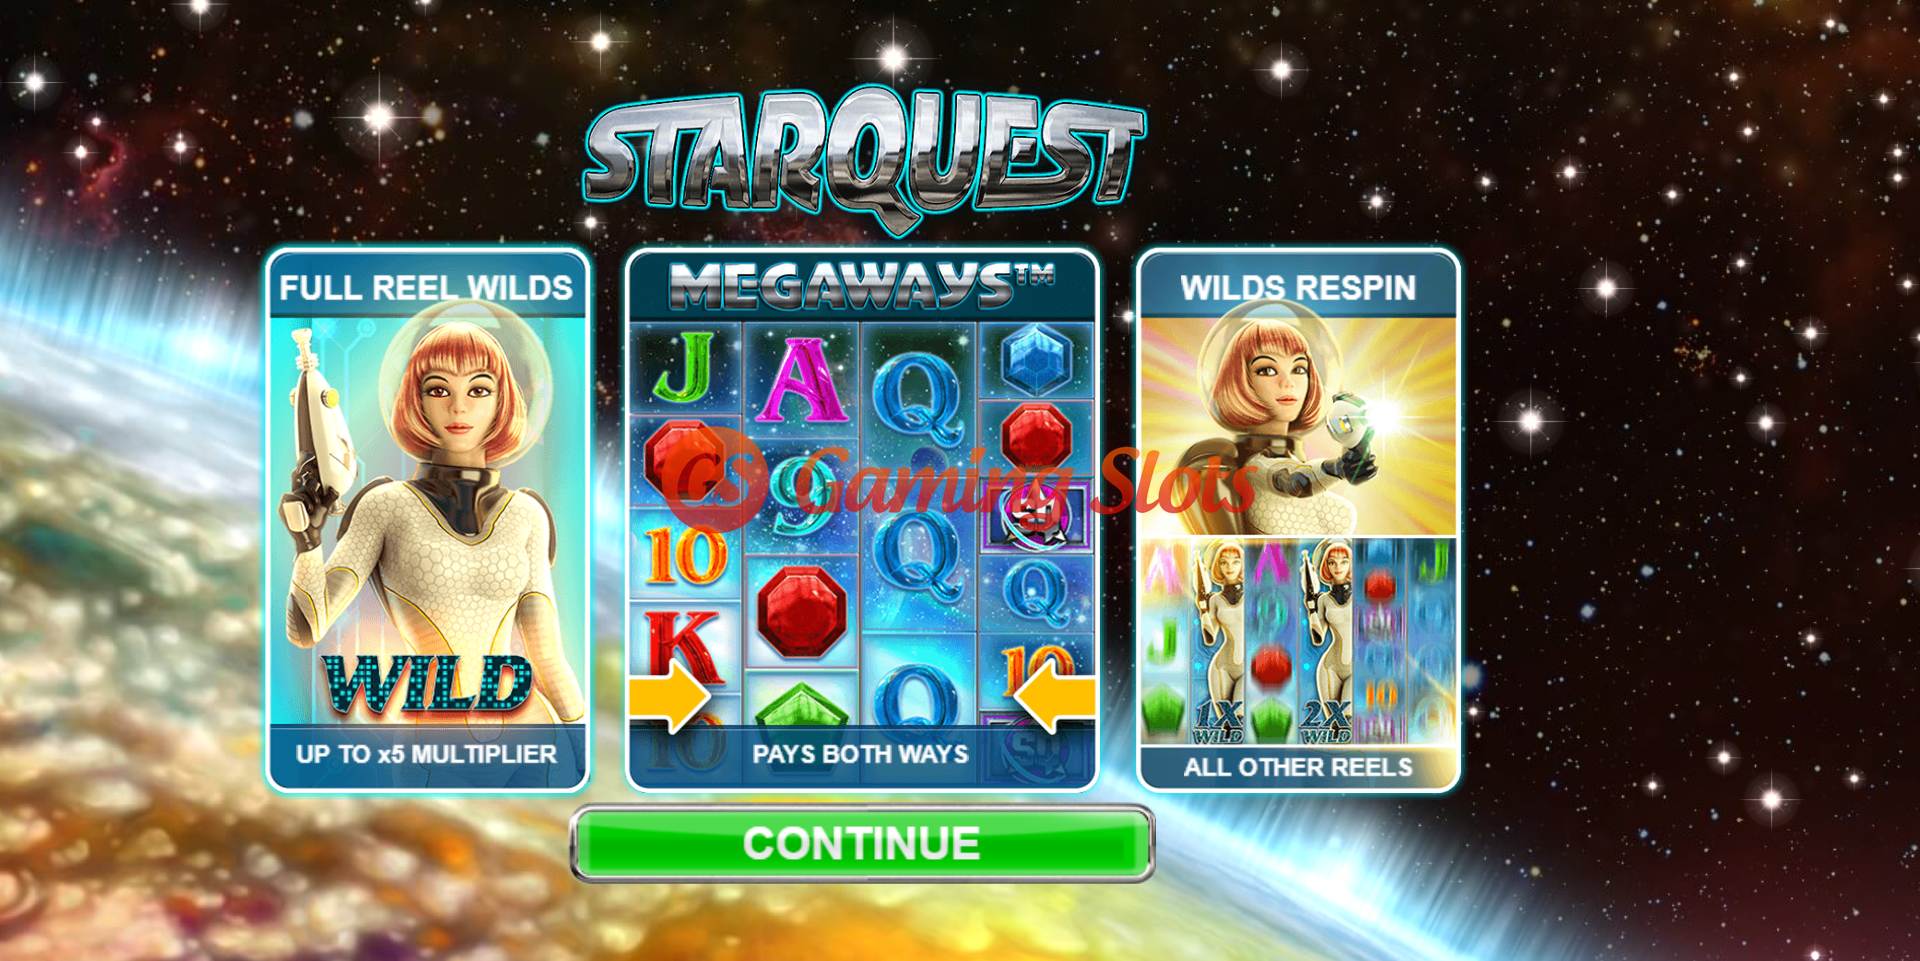 Game Intro for Starquest slot from Big Time Gaming